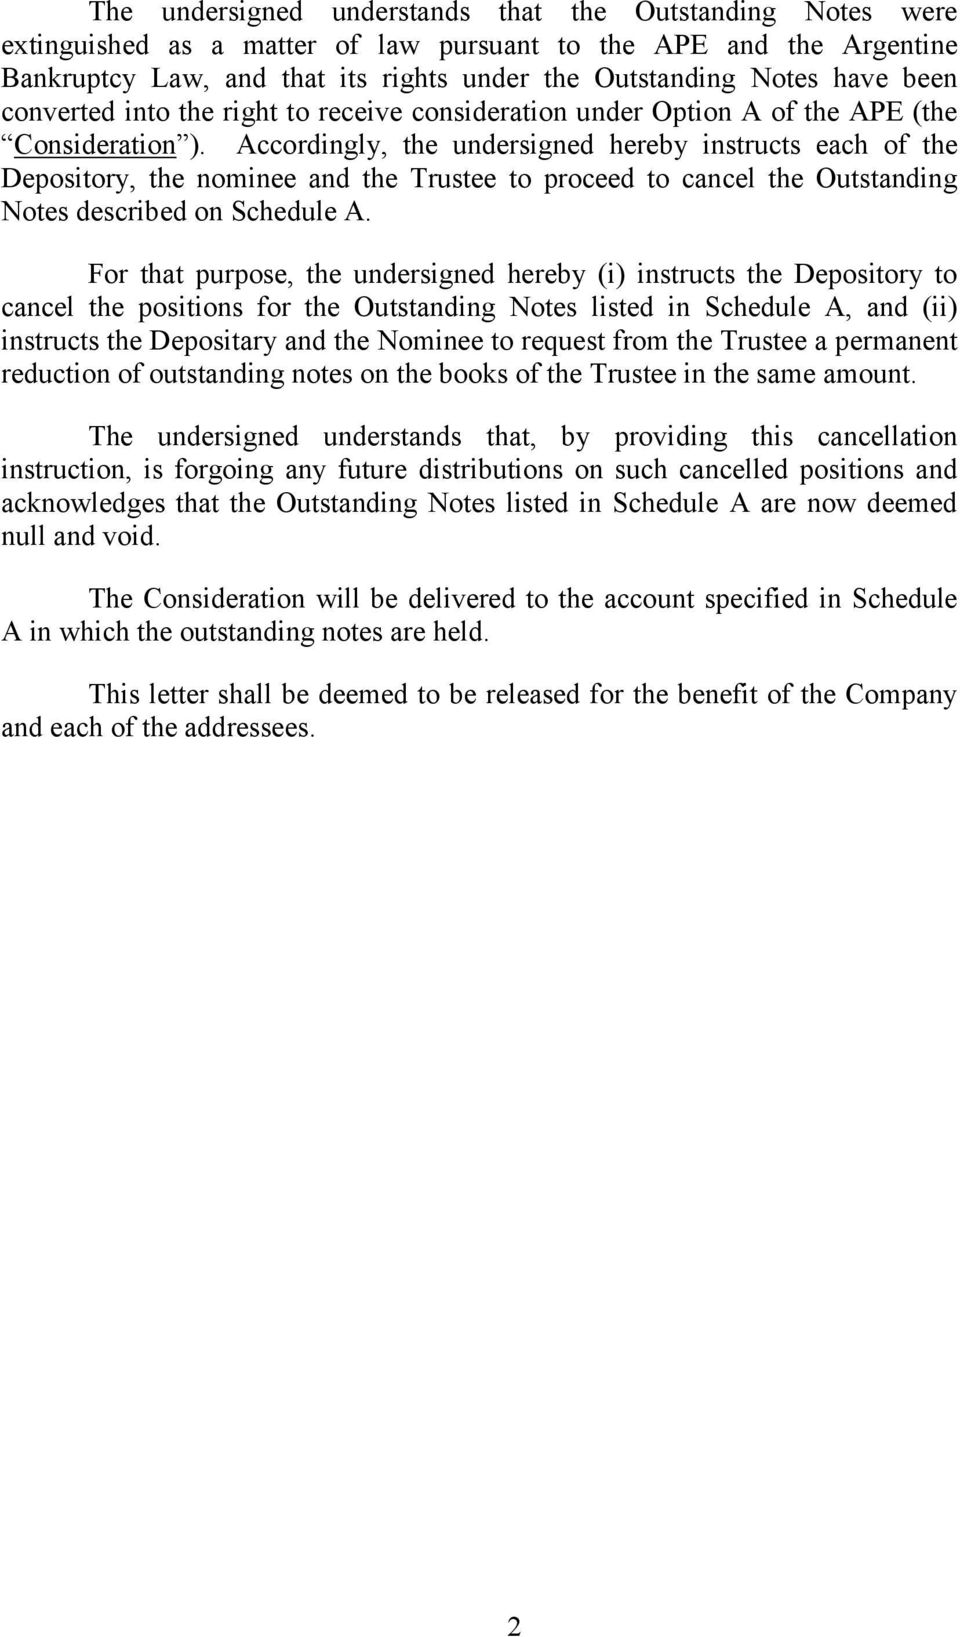 Accordingly, the undersigned hereby instructs each of the Depository, the nominee and the Trustee to proceed to cancel the Outstanding Notes described on Schedule A.